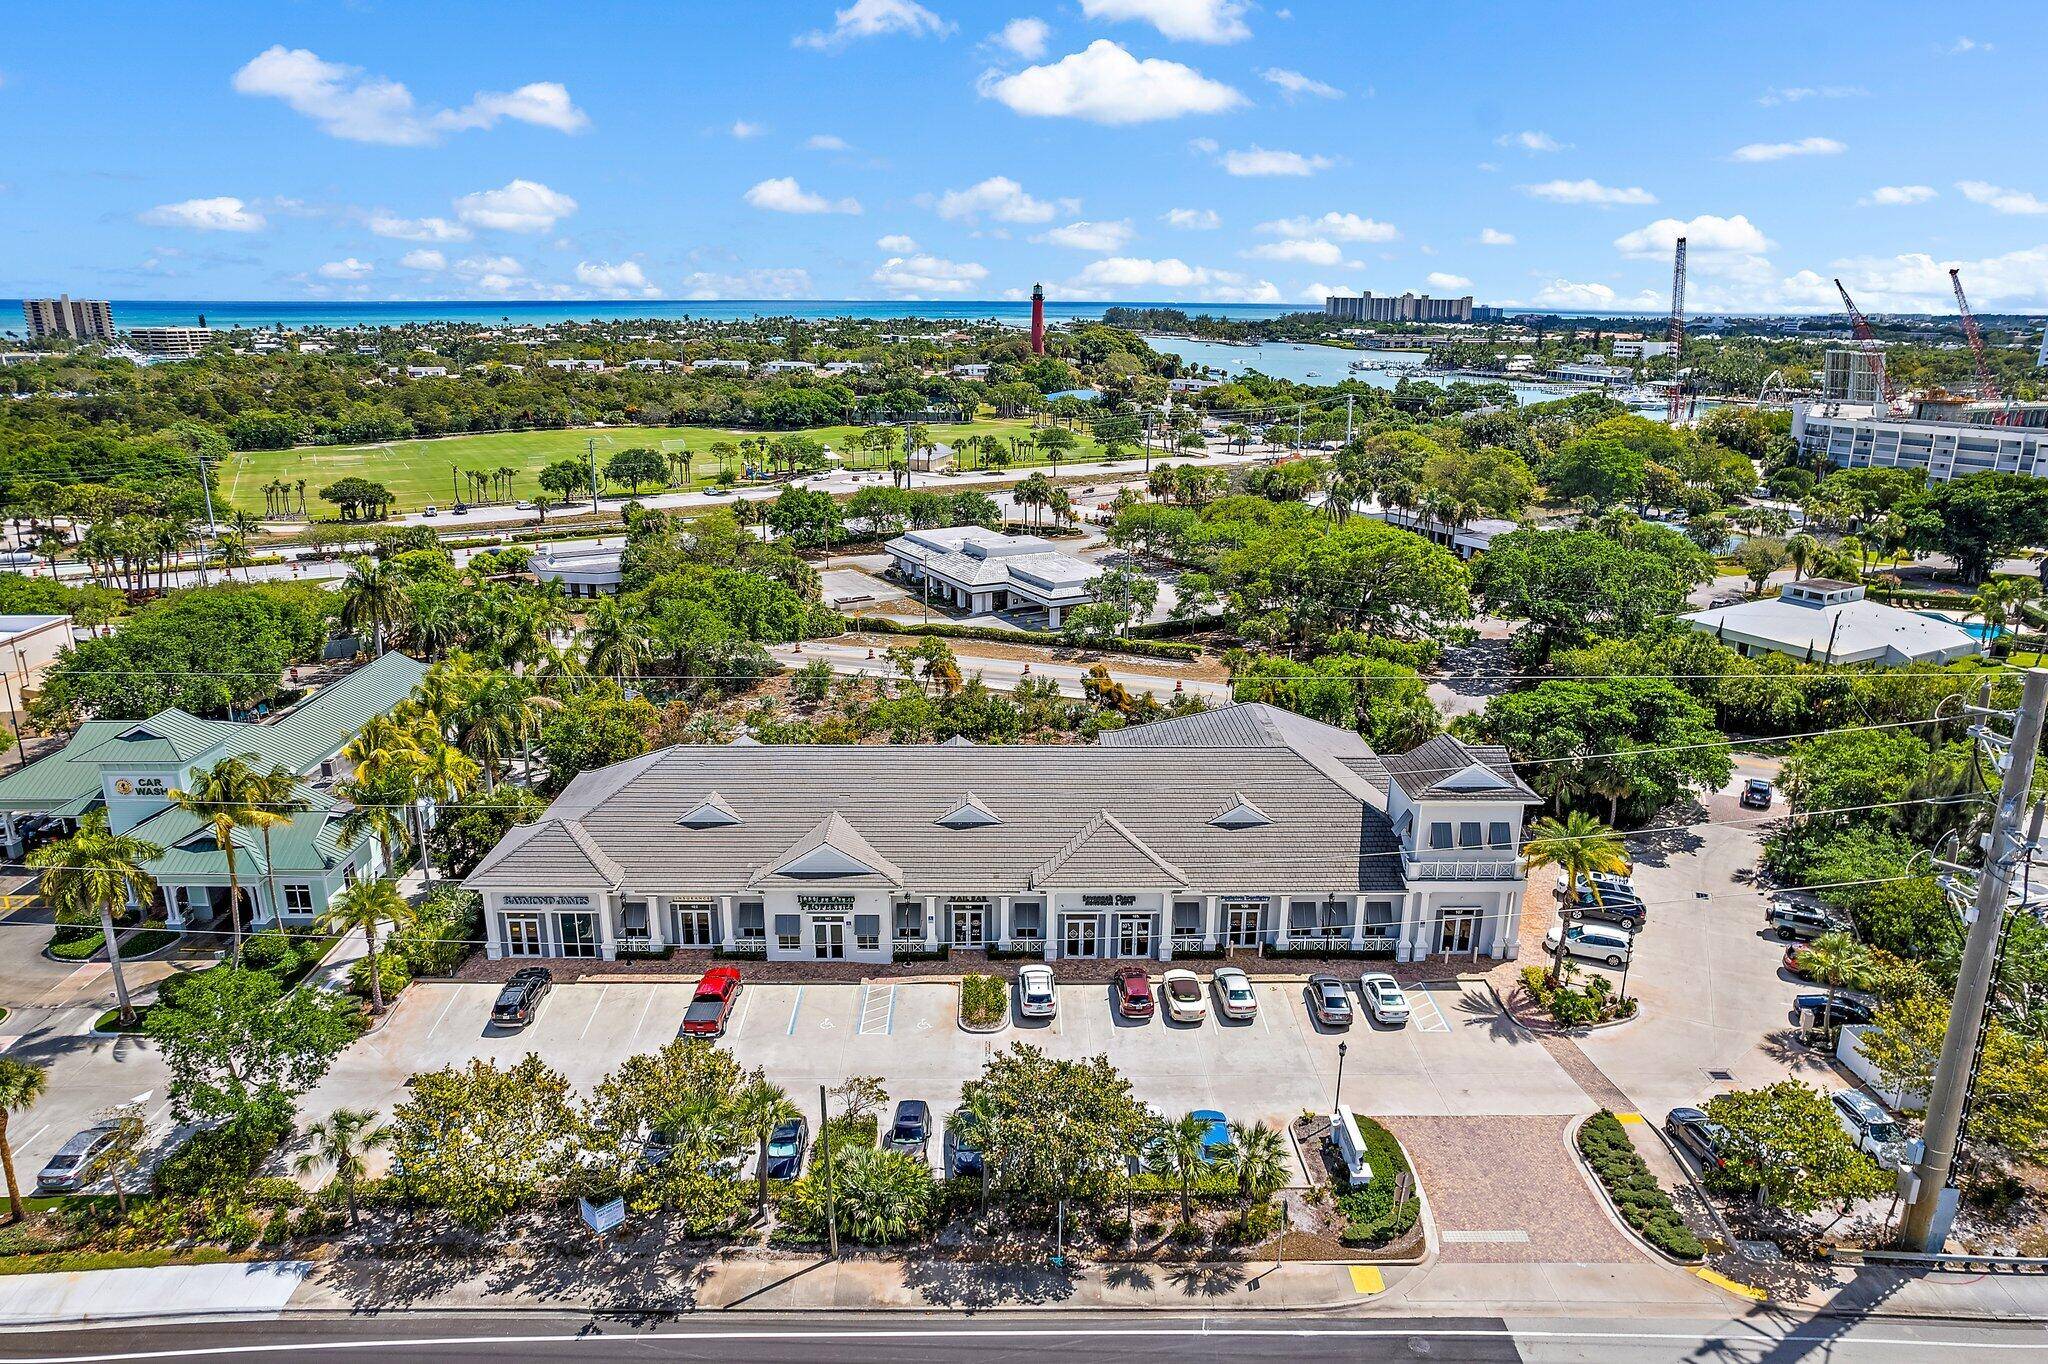 This commercial property is located on Alternate A1A, which is a highly desirable location in the area due to its excellent visibility and accessibility.